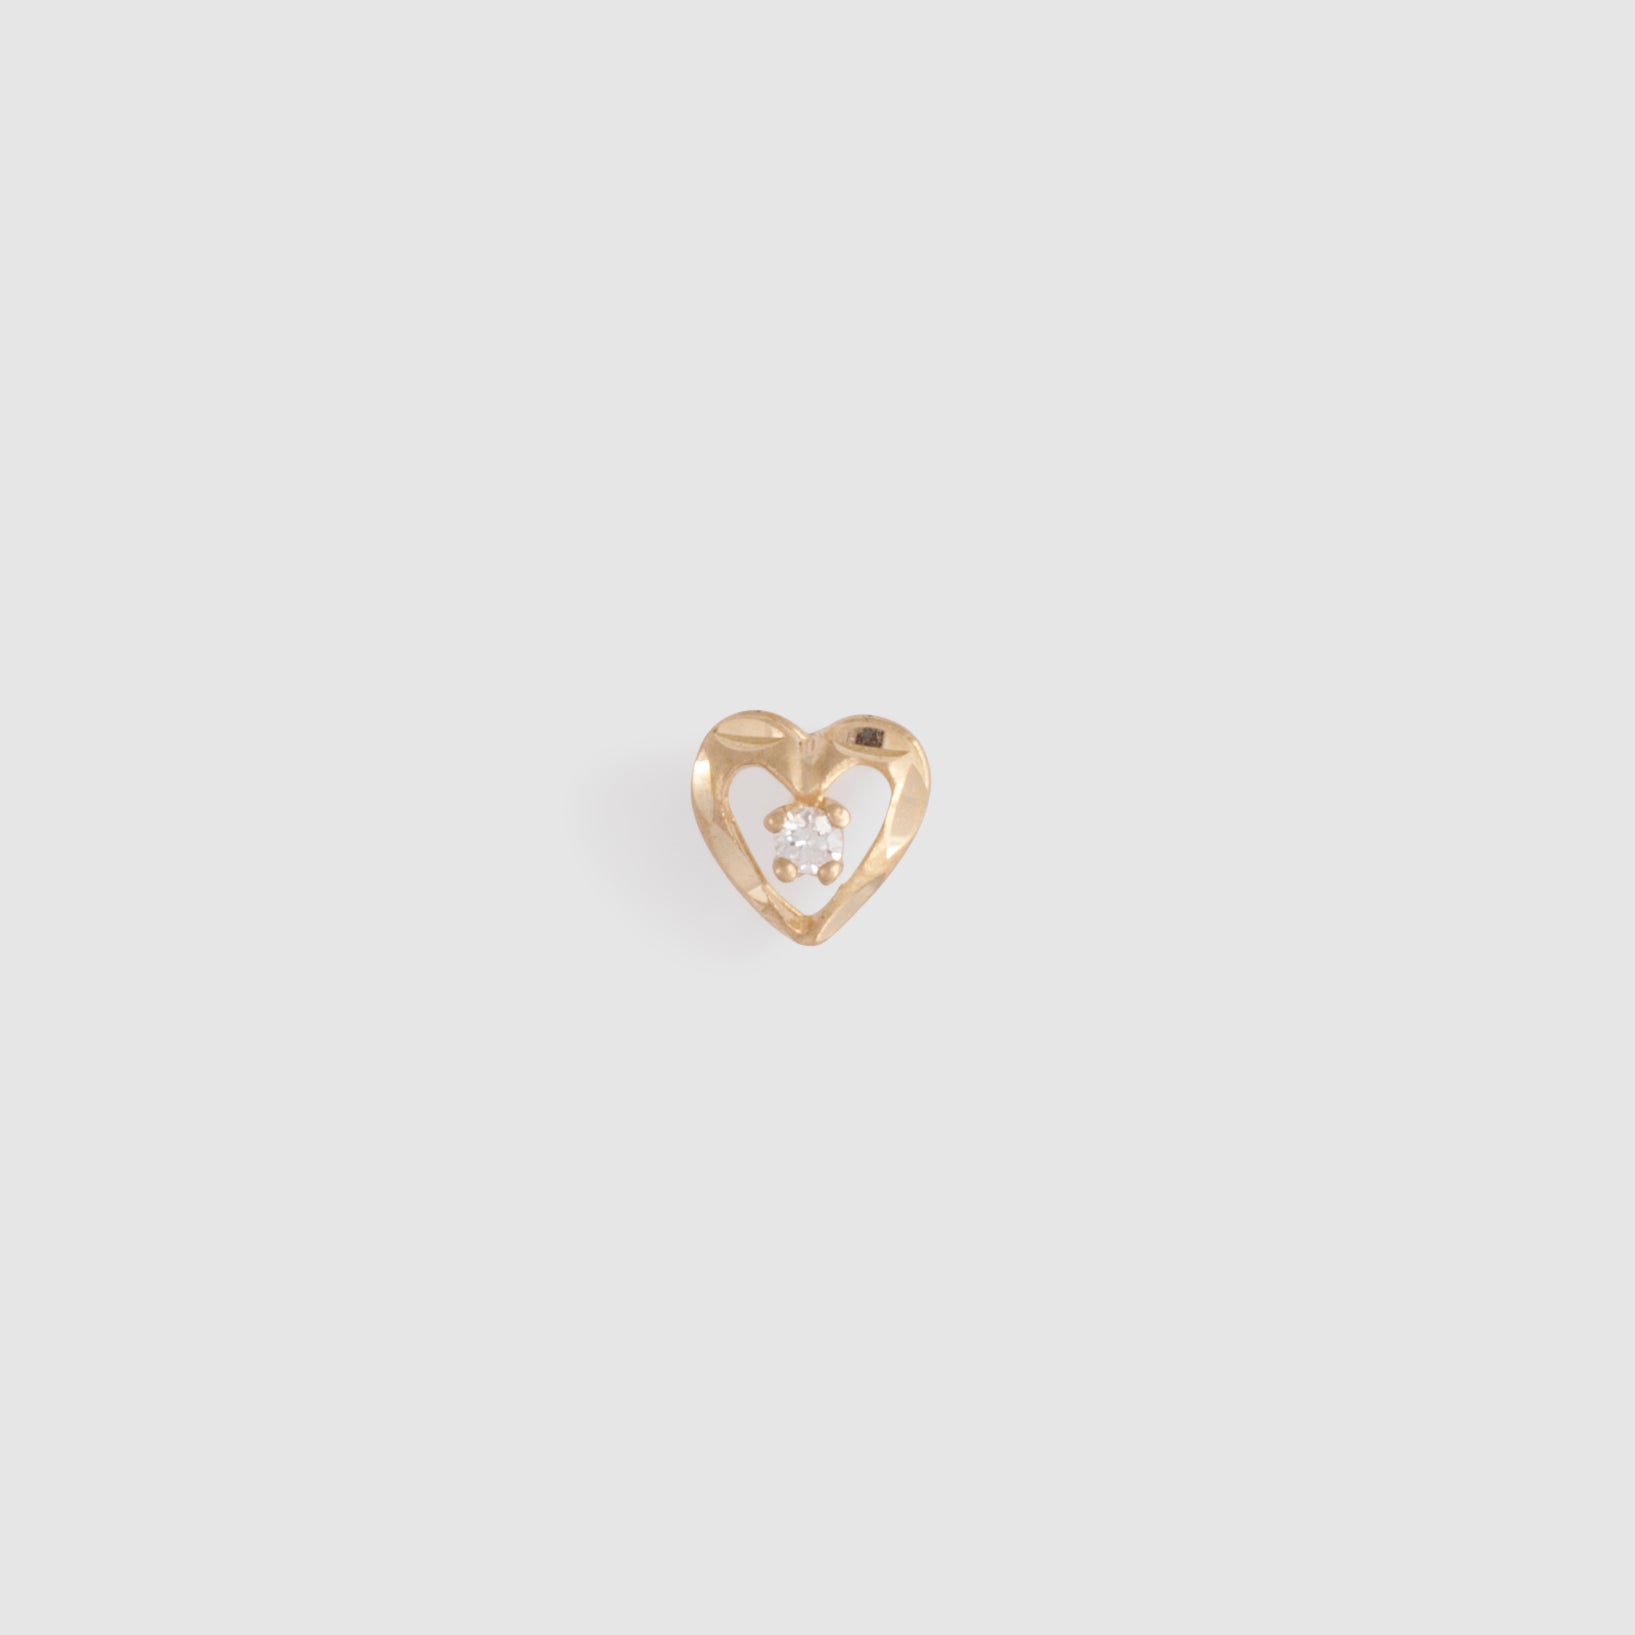 Gold heart-shaped studs with cz stone